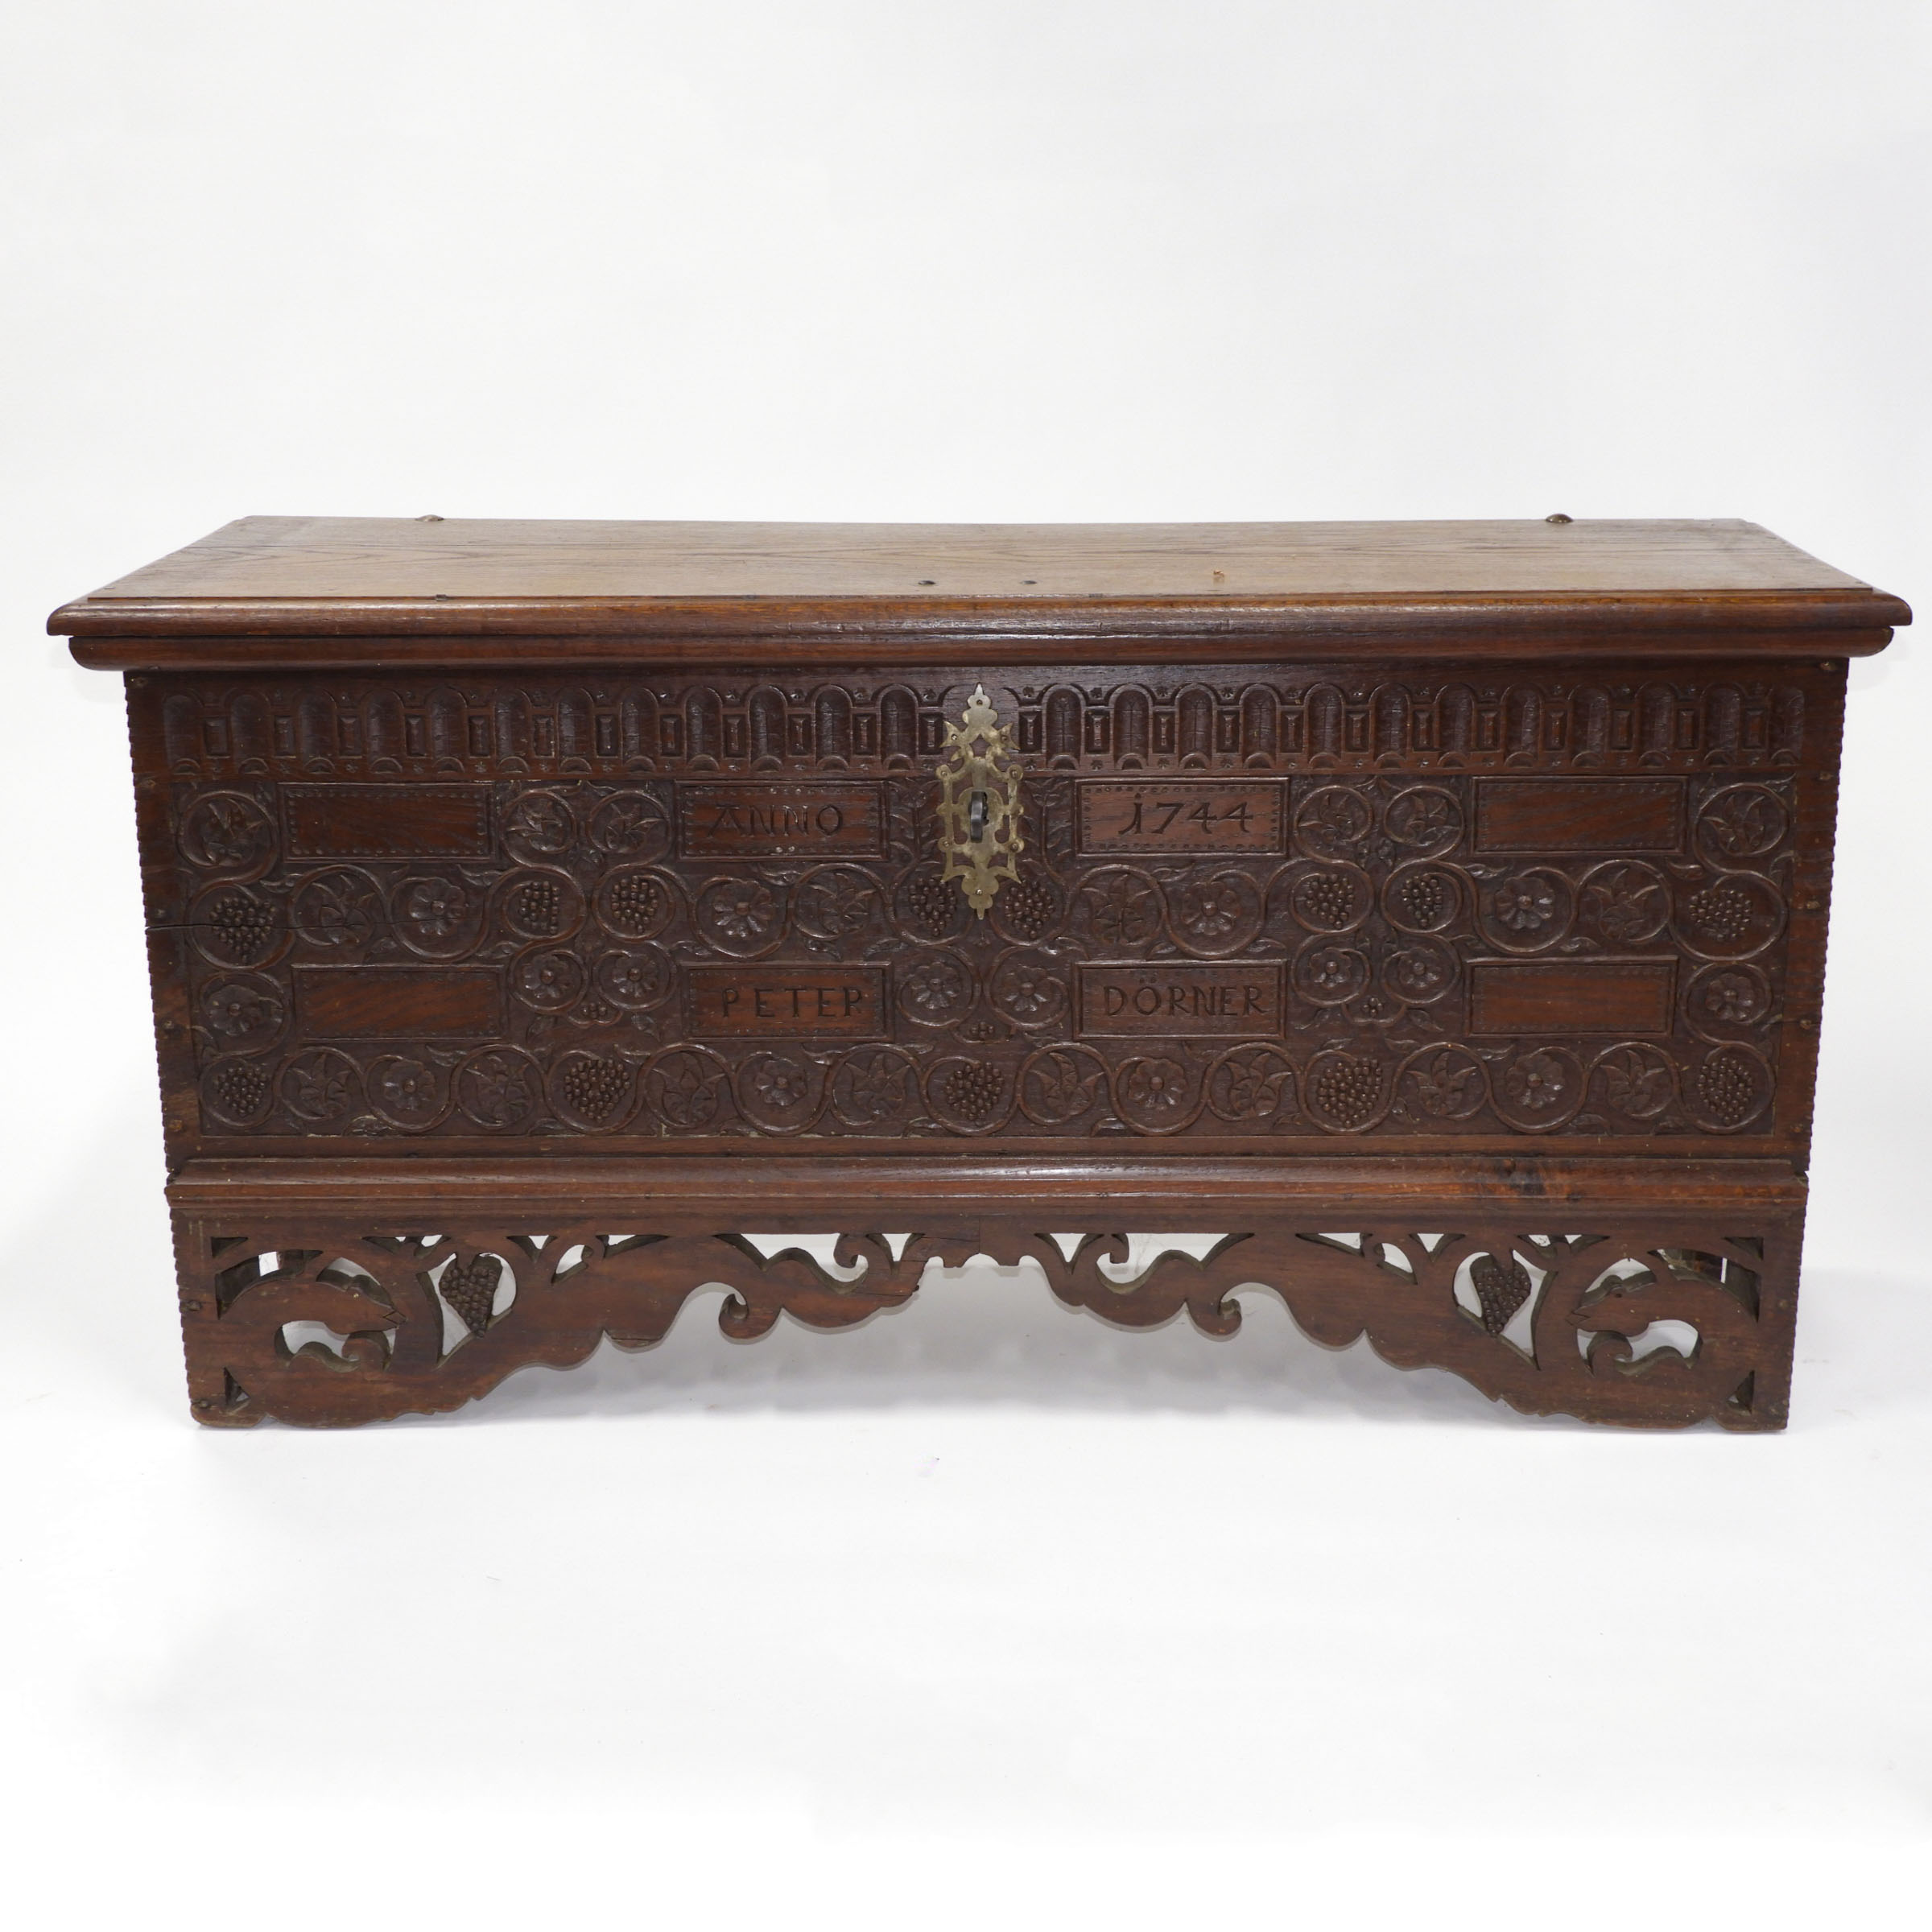 Large German Carved Oak Coffer Chest, 19th century